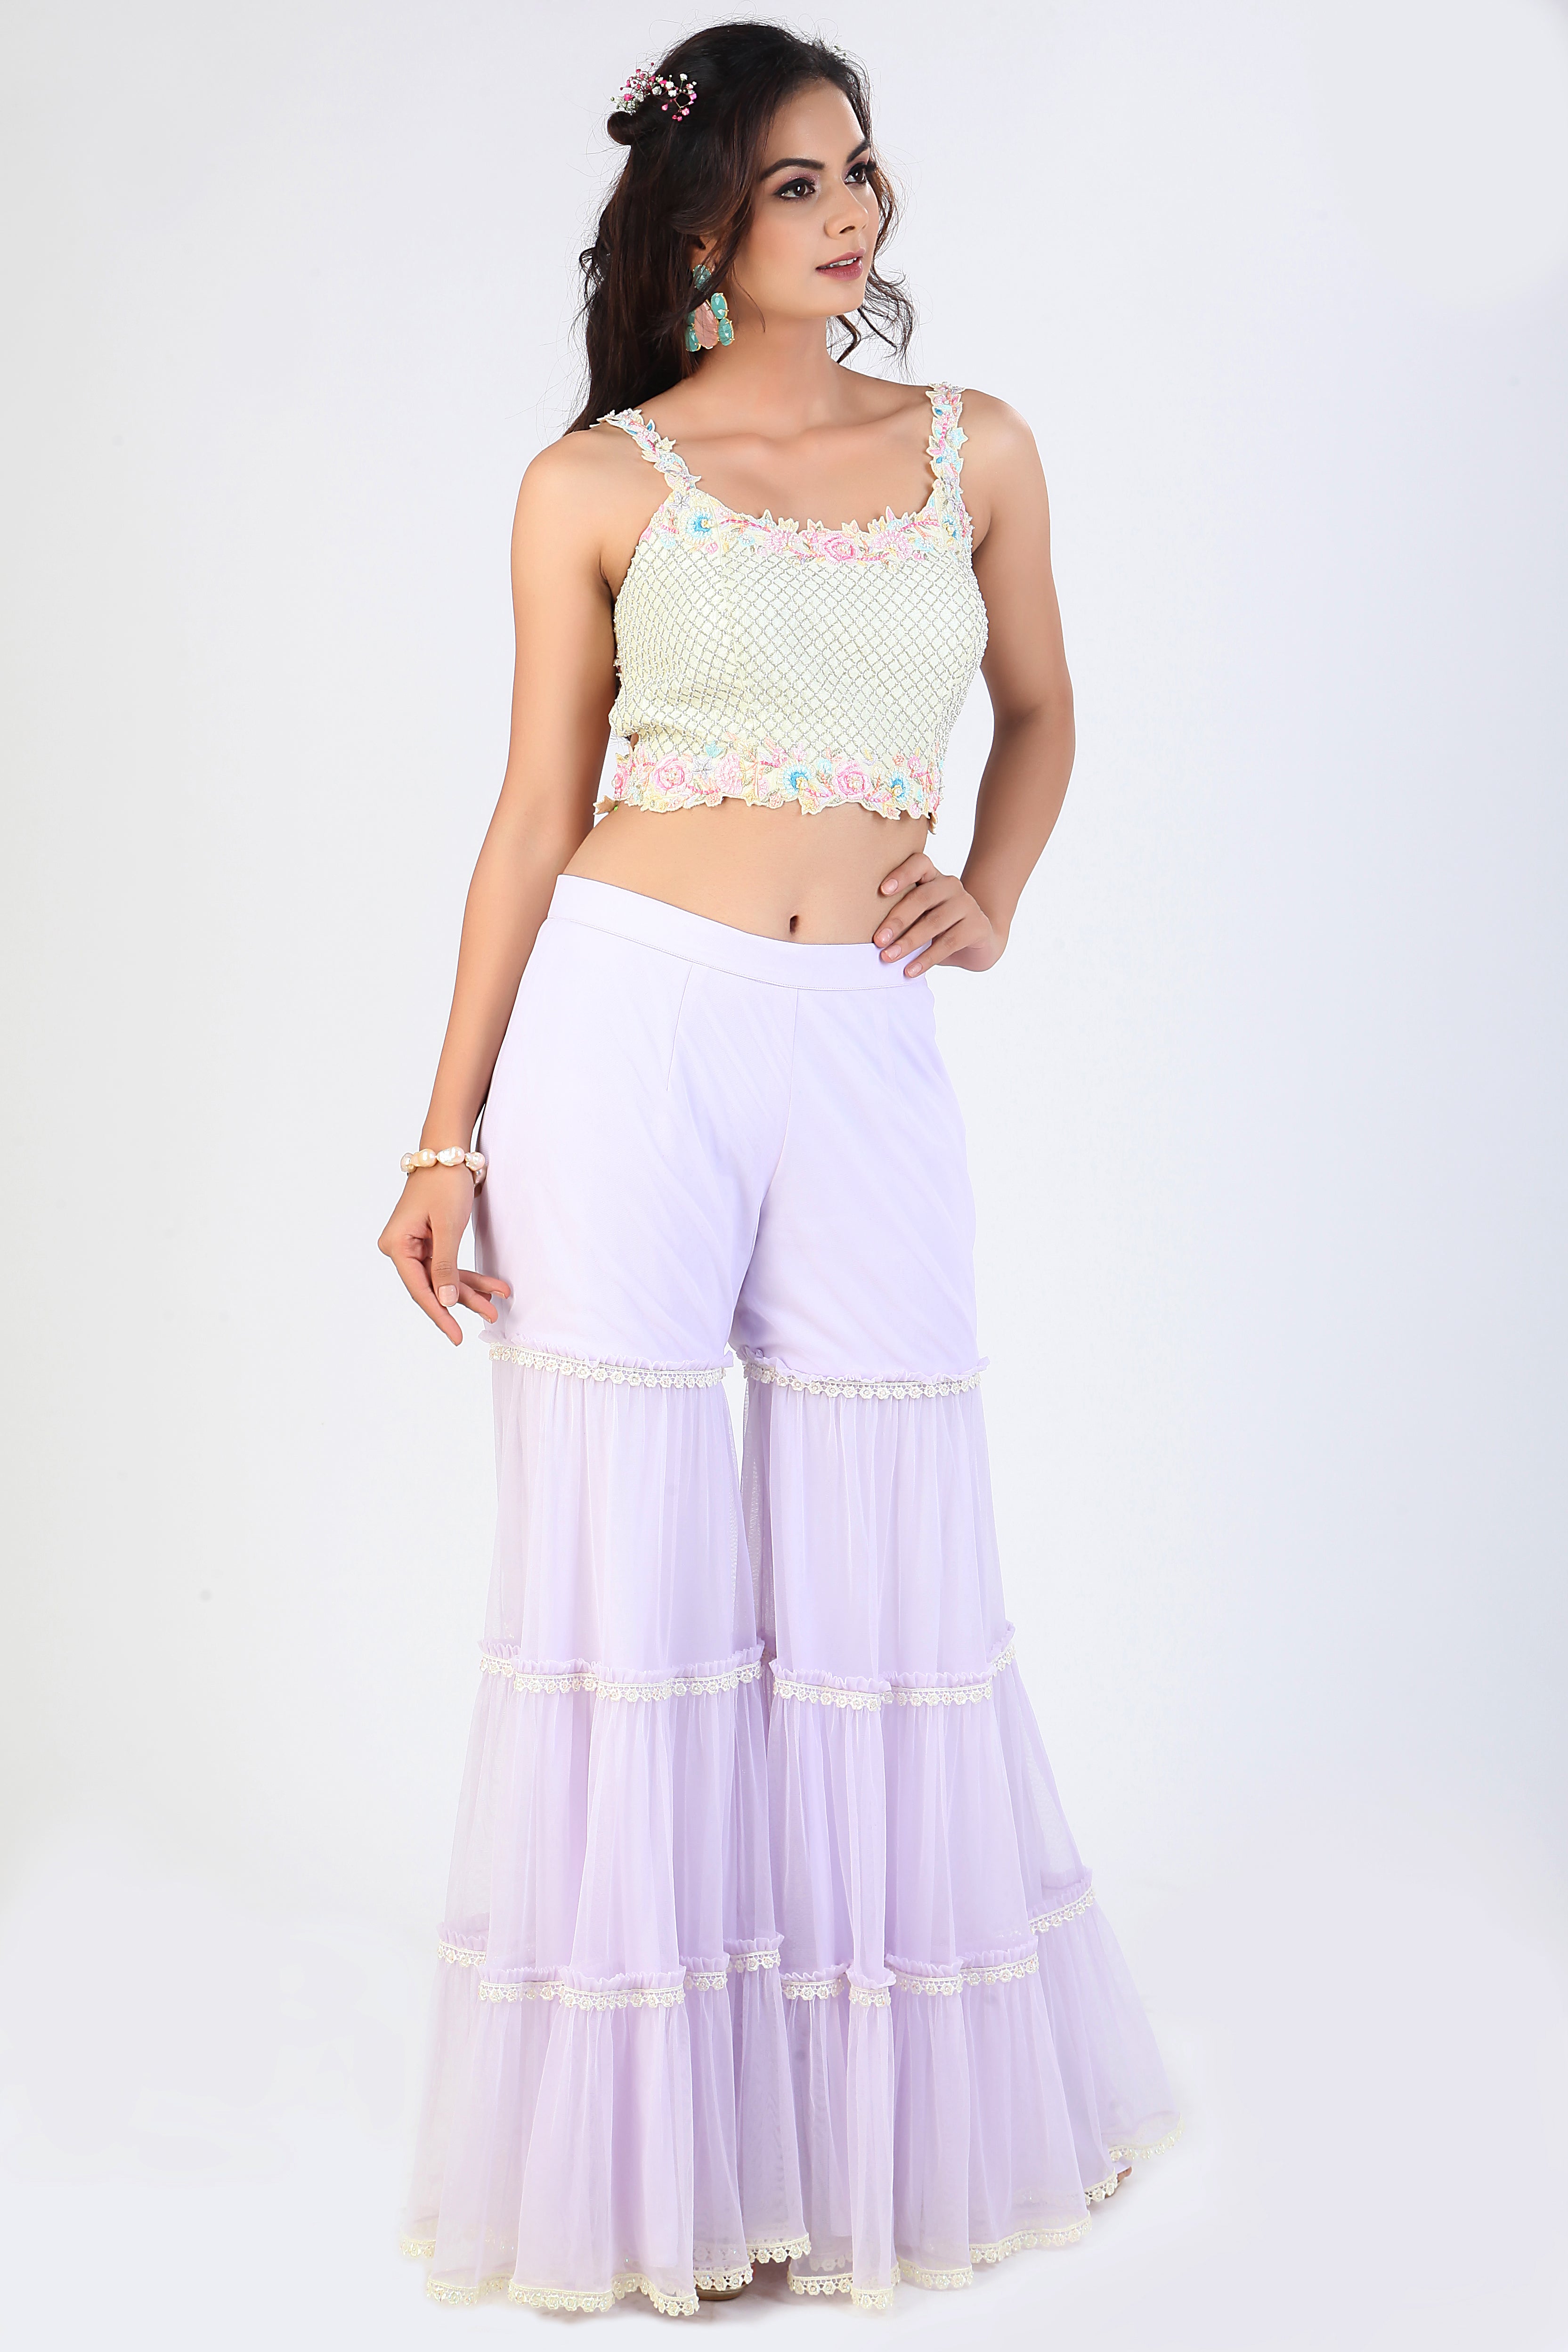 Indya Women's Polyester Blush Geo Knotted Crop Top and Sharara Pants Set  (ICO00096_Pink_XL) : Amazon.in: Clothing & Accessories